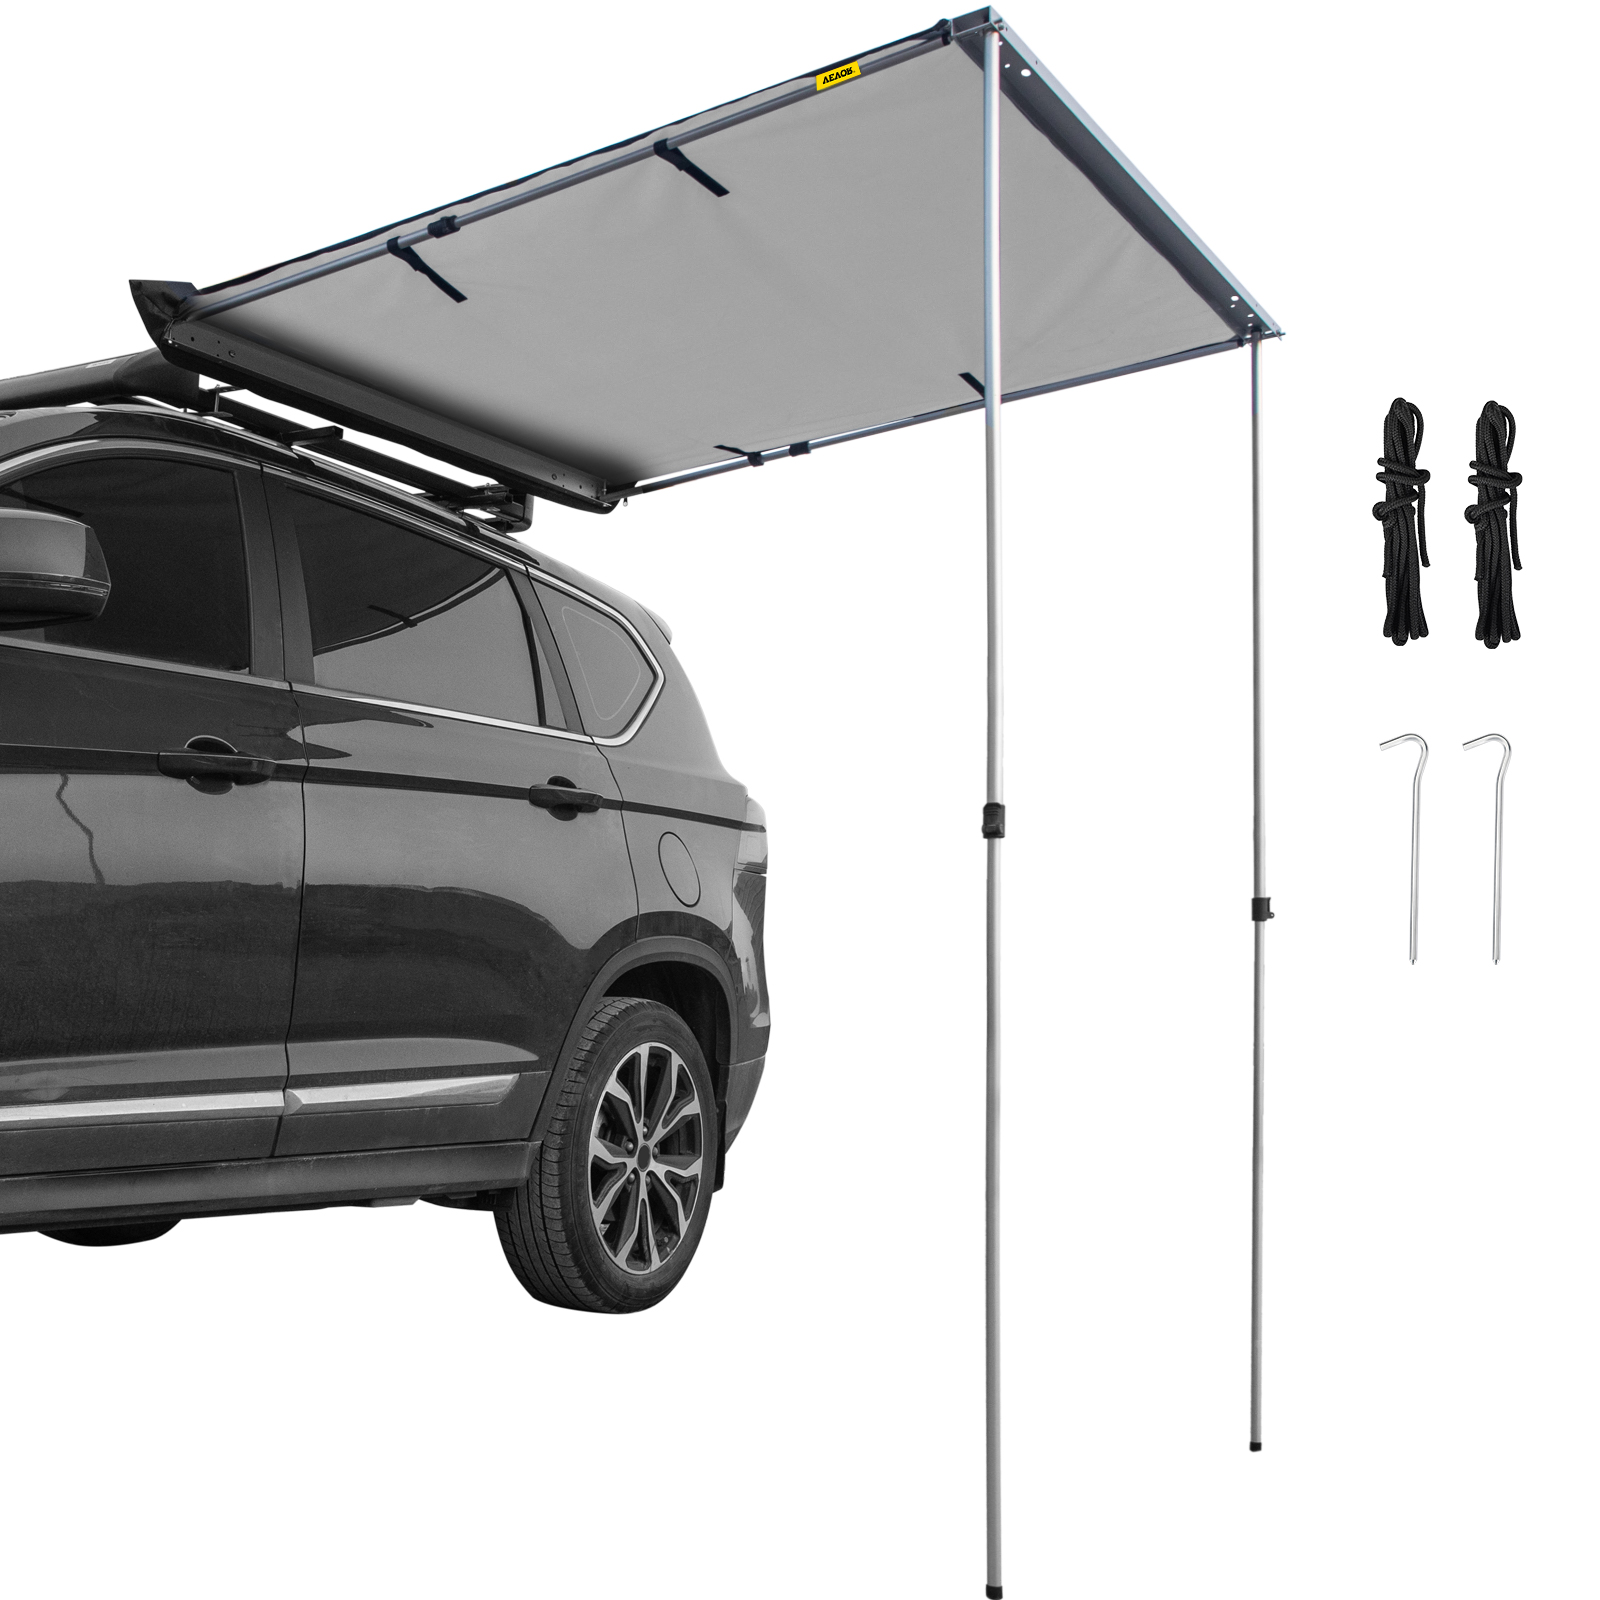 VEVOR Car Side Awning, 4.6'x6.6', Pull-Out Retractable Vehicle Awning  Waterproof UV50+, Telescoping Poles Trailer Sunshade Rooftop Tent w/ Carry  Bag for Jeep/SUV/Truck/Van Outdoor Camping Travel, Grey VEVOR US